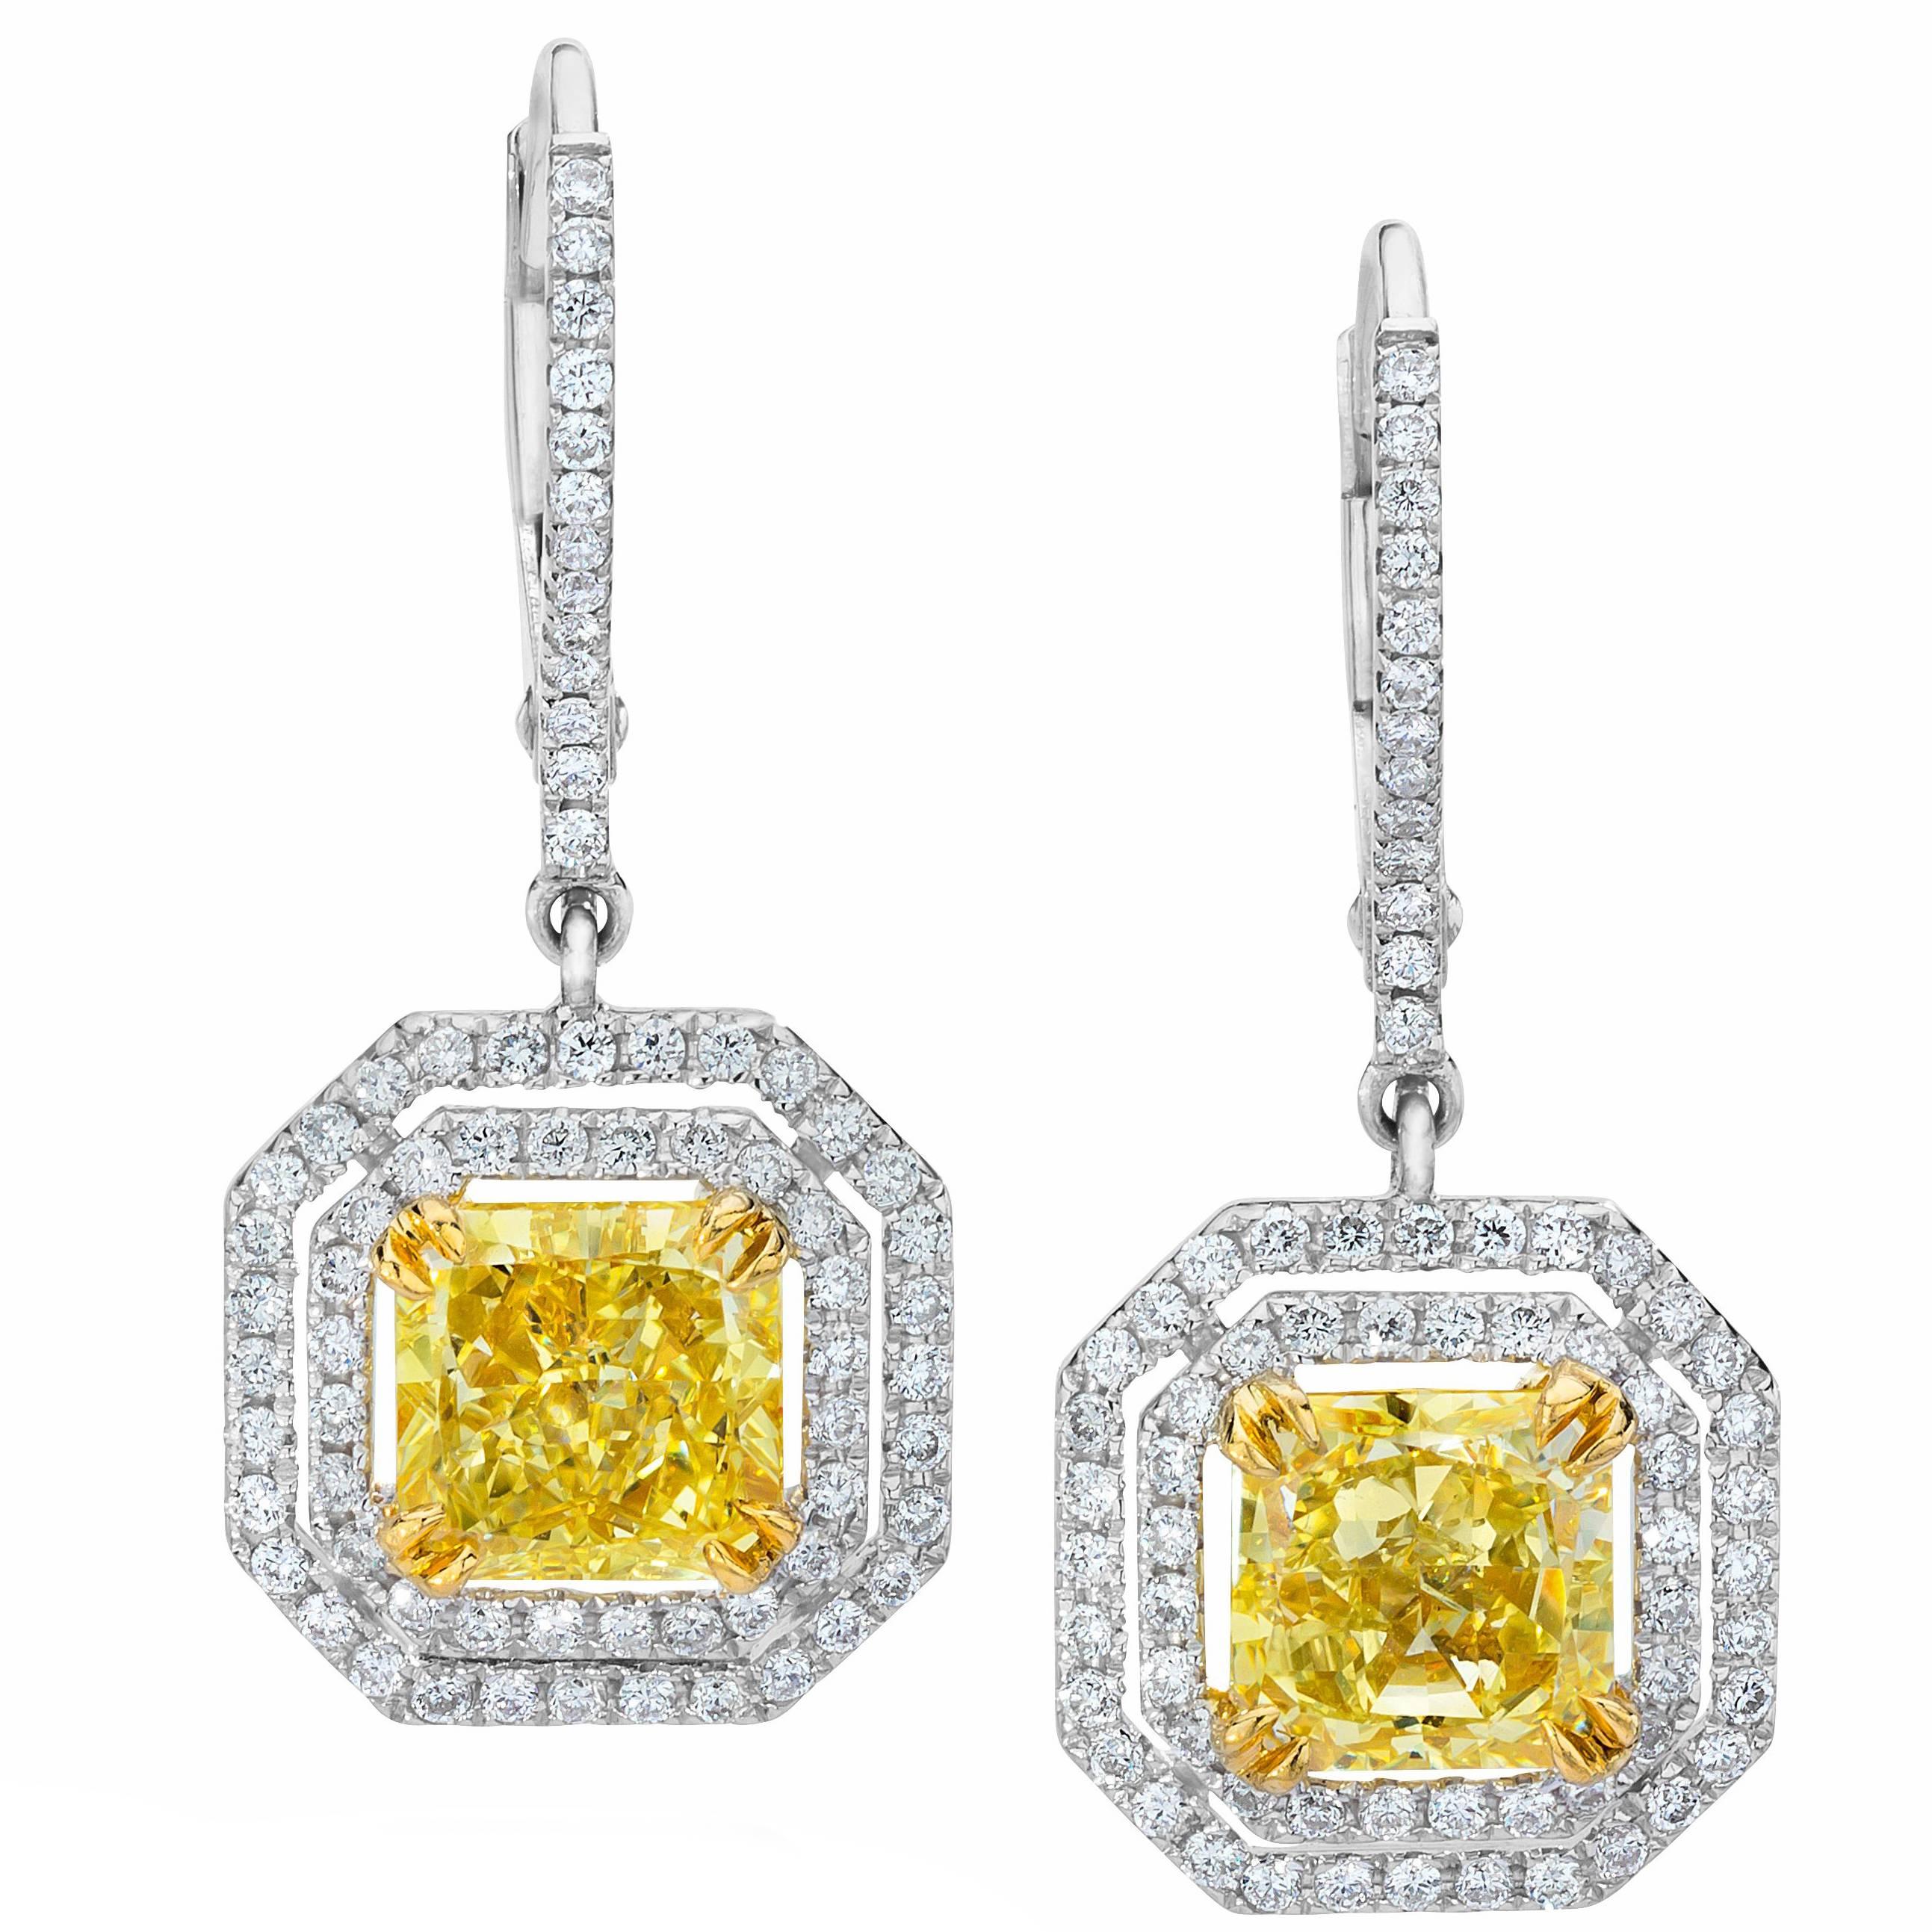 3.00 Carats Total Radiant Cut Yellow Diamond Halo Dangle Earrings For Sale